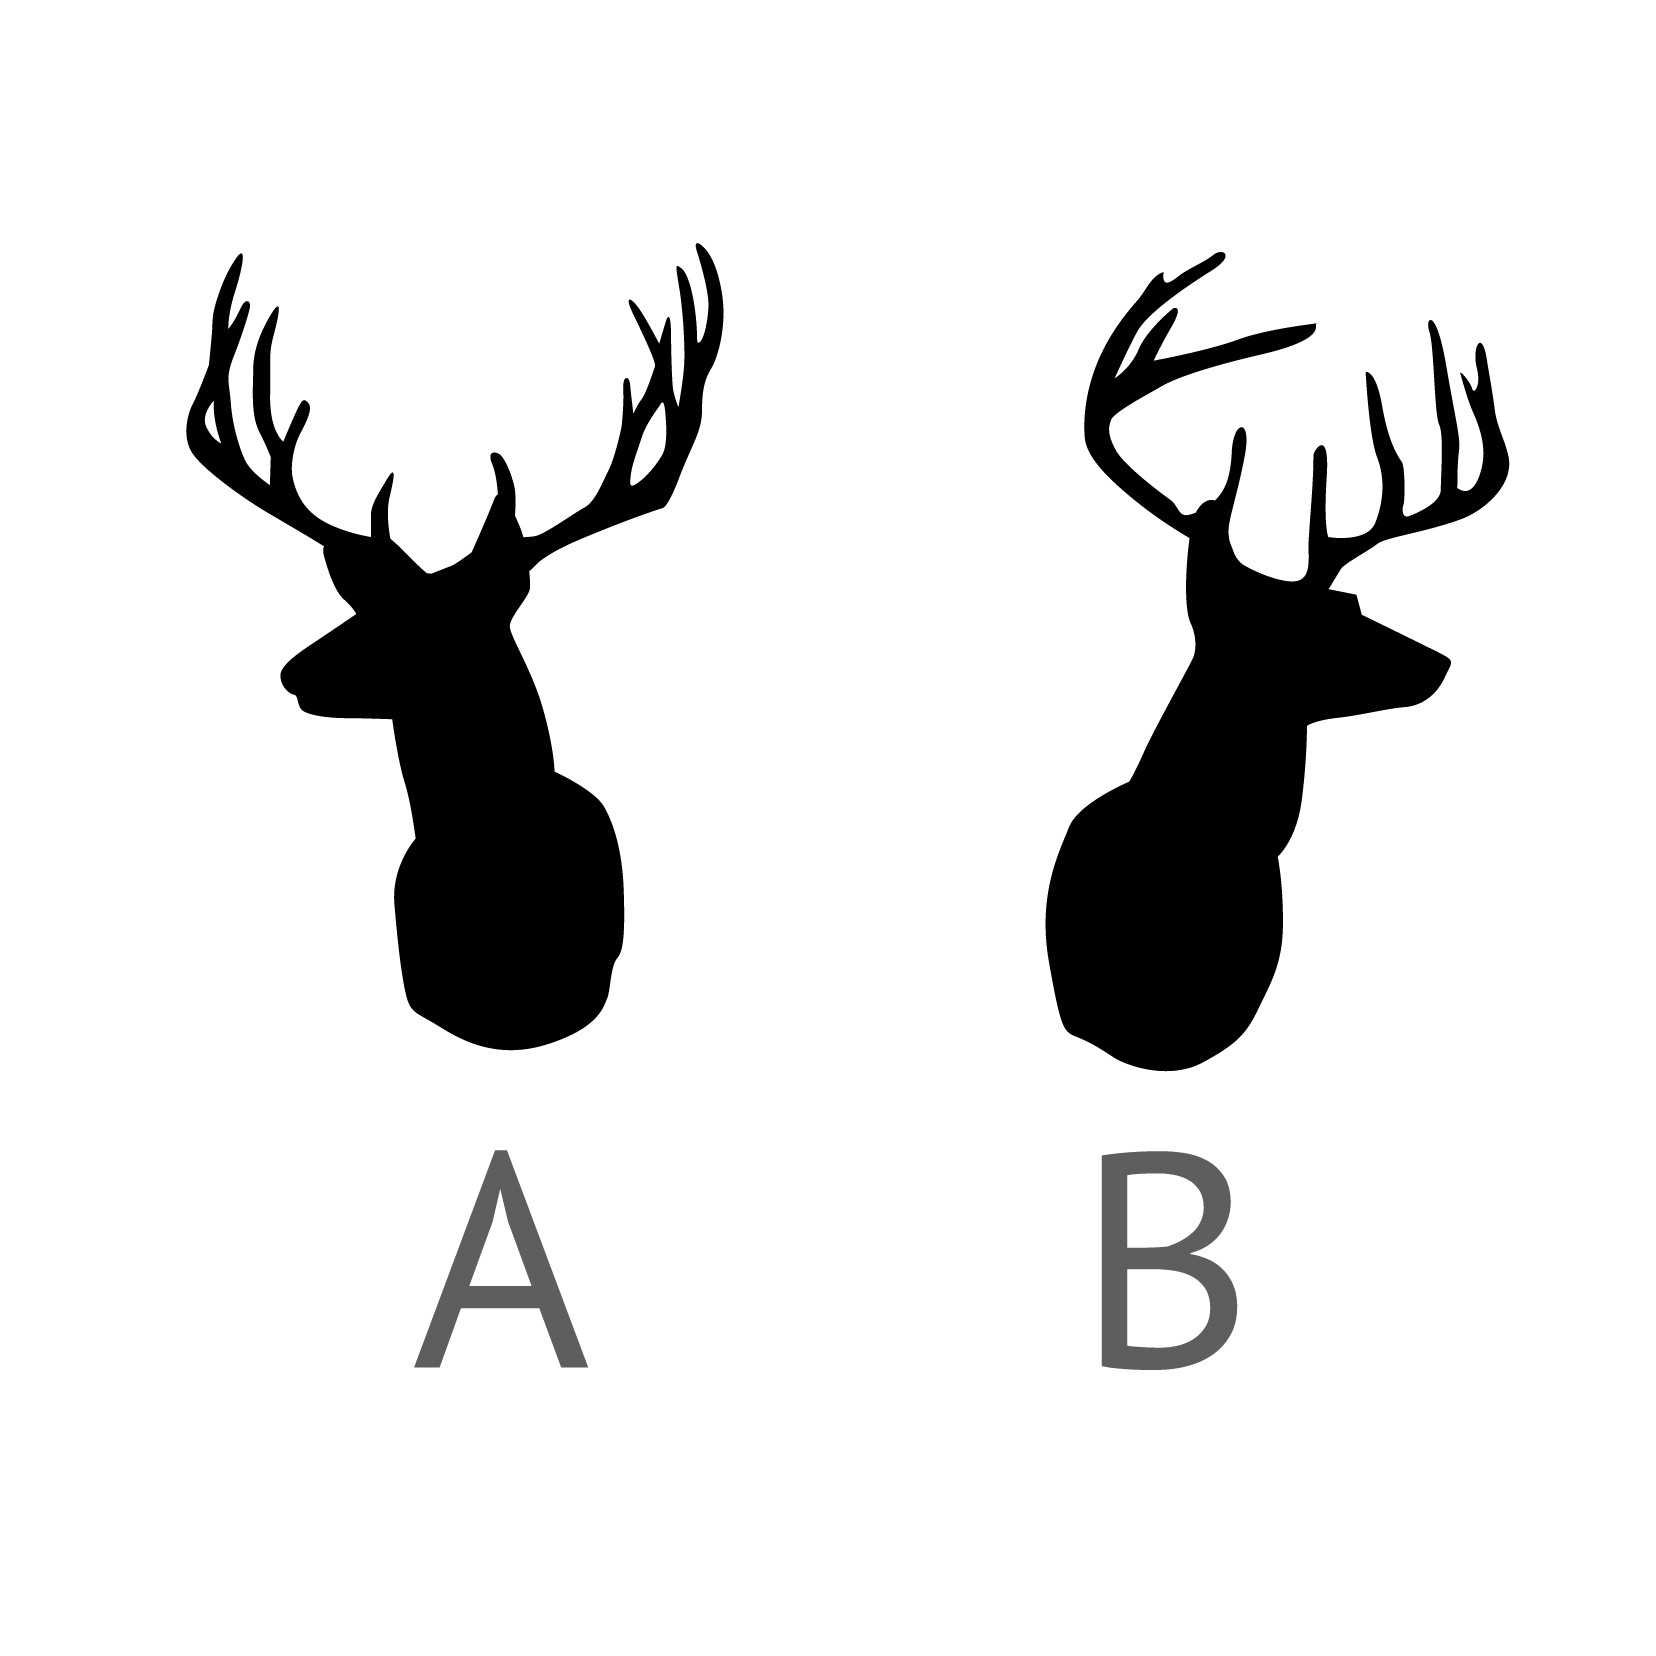 Stag Head Silhouette Vector - ClipArt Best